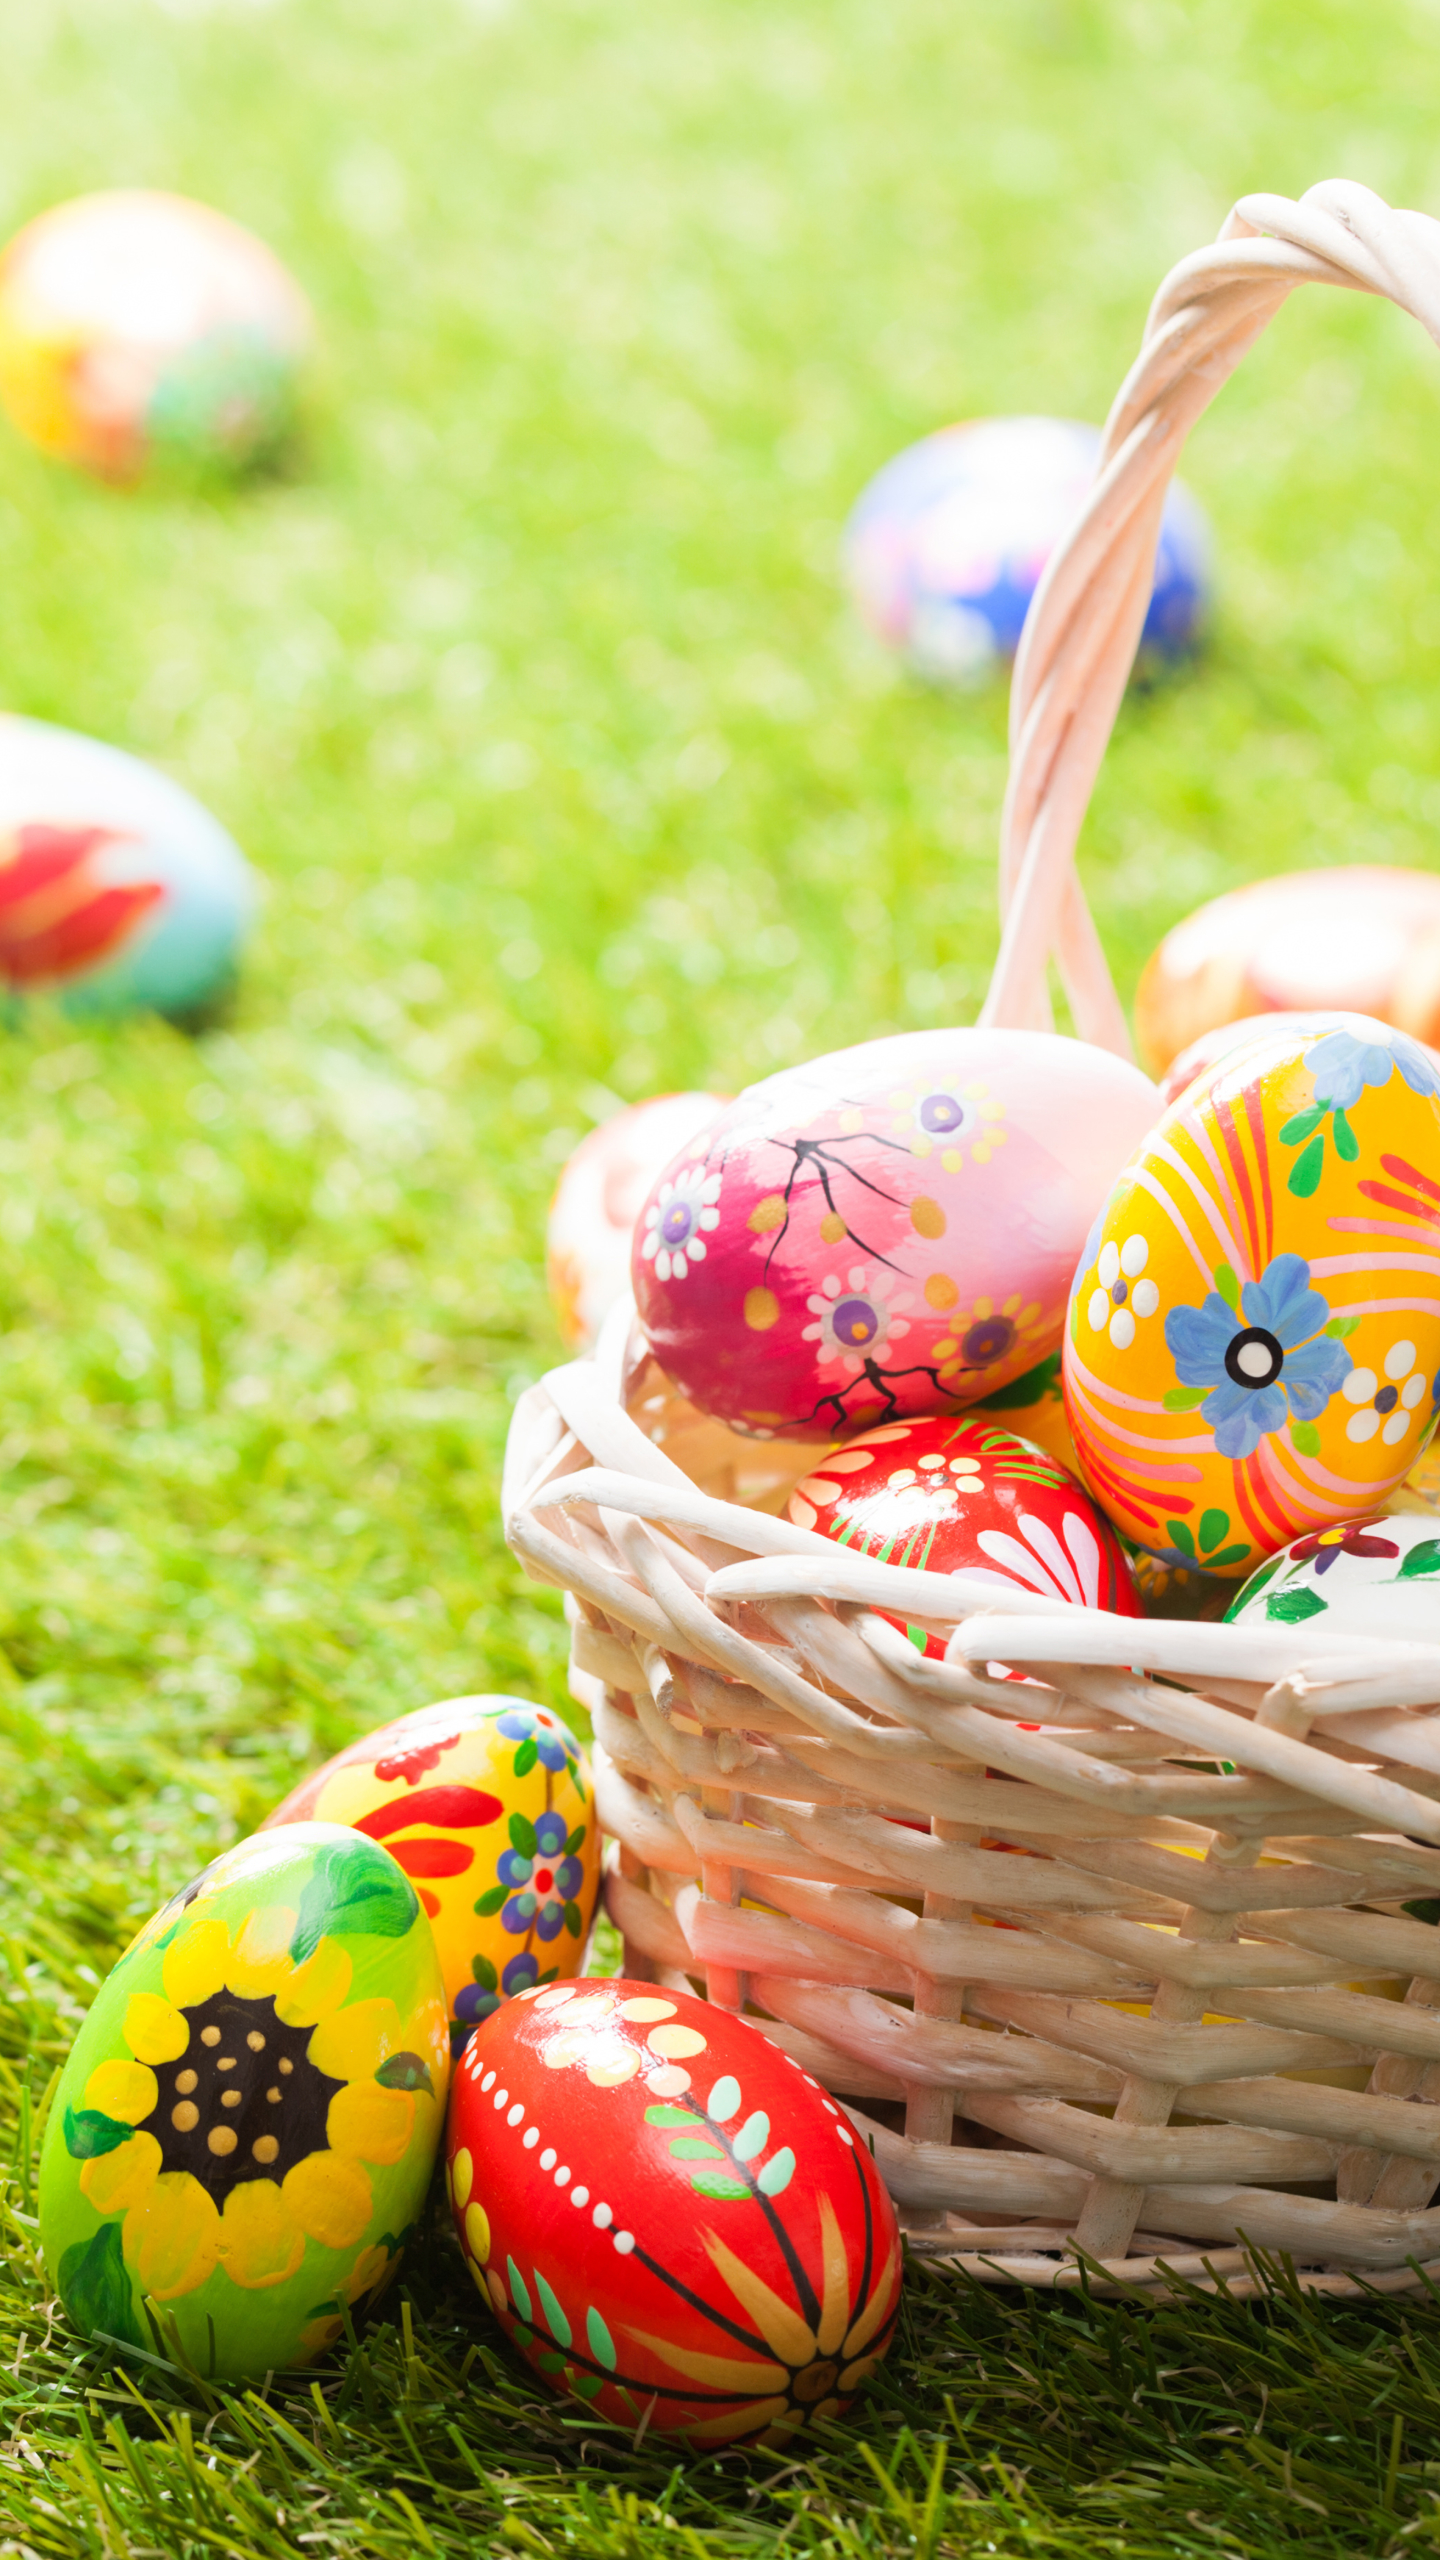 79 Awesome Easter backgrounds For iPhone 13 pro max  Easter wallpaper Easter  backgrounds Iphone wallpaper easter